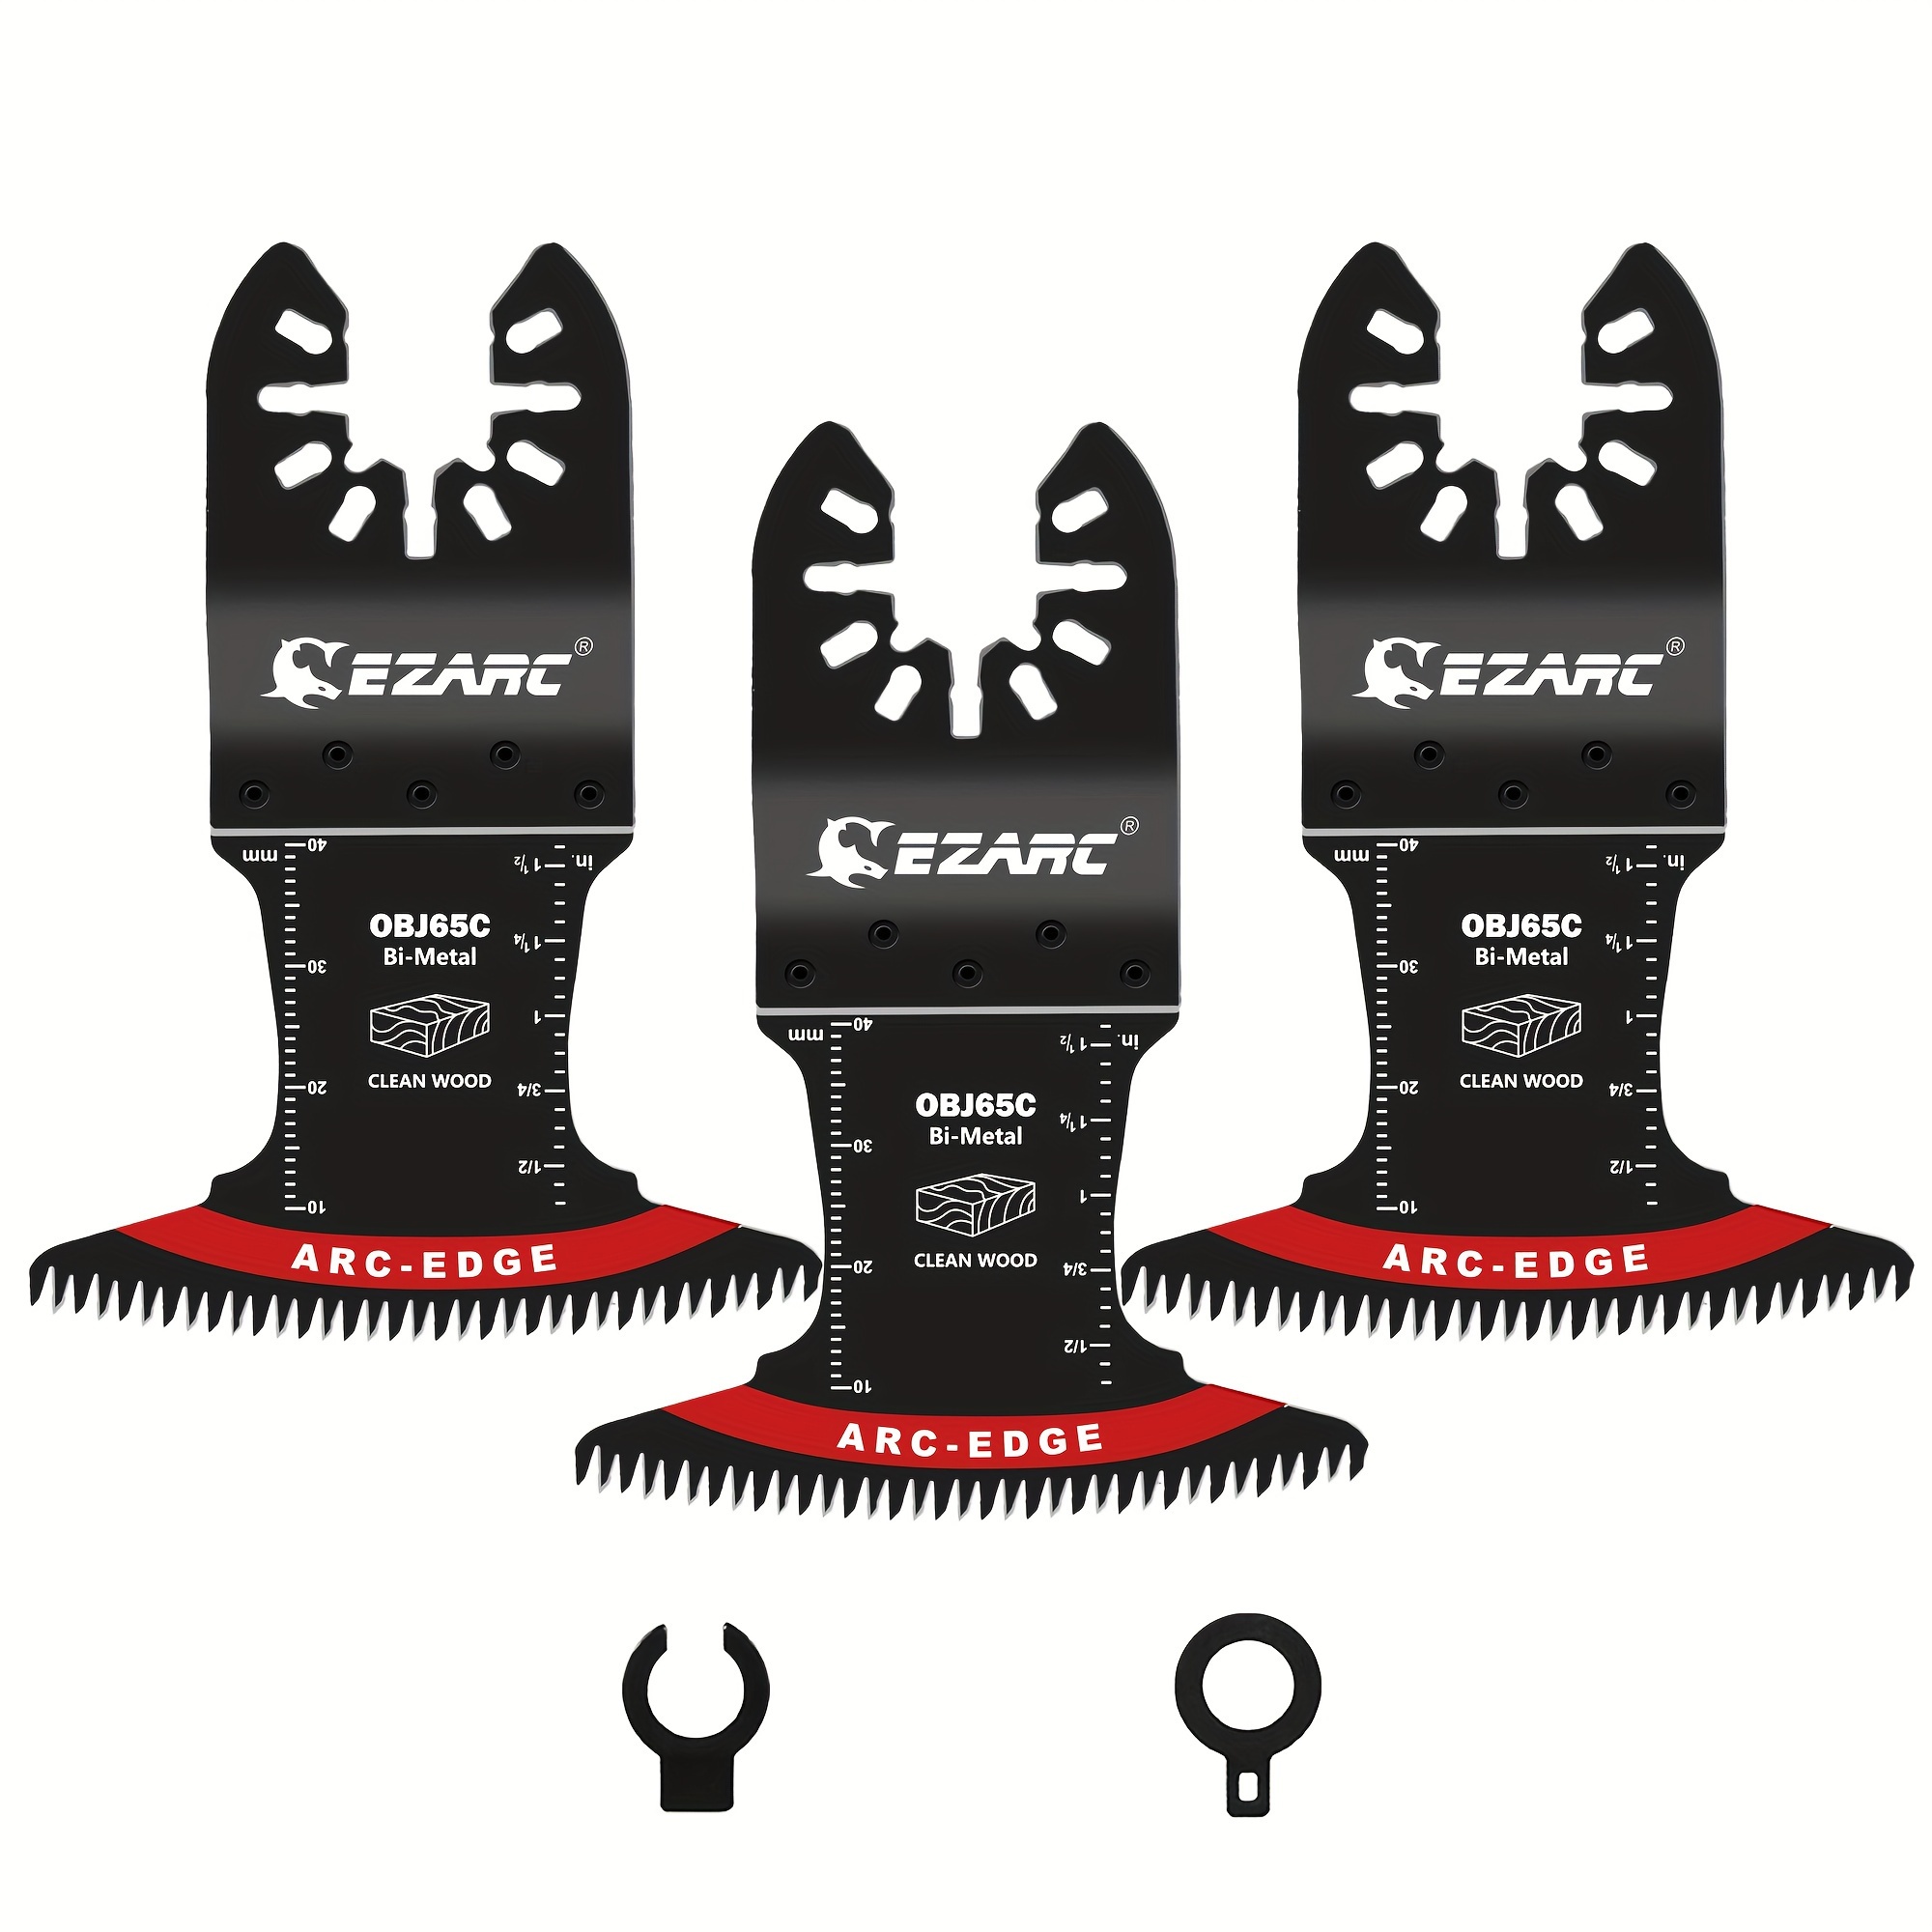 

Ezarc 3pcs Extra-wide Japanese Tooth Arc Edge Oscillating Saw Blades, Bi-metal Multitool Blades Set Multifunctional Clean Cut For Wood And Plastic, Universal Quick Release Oscillating Tool Blades Kits